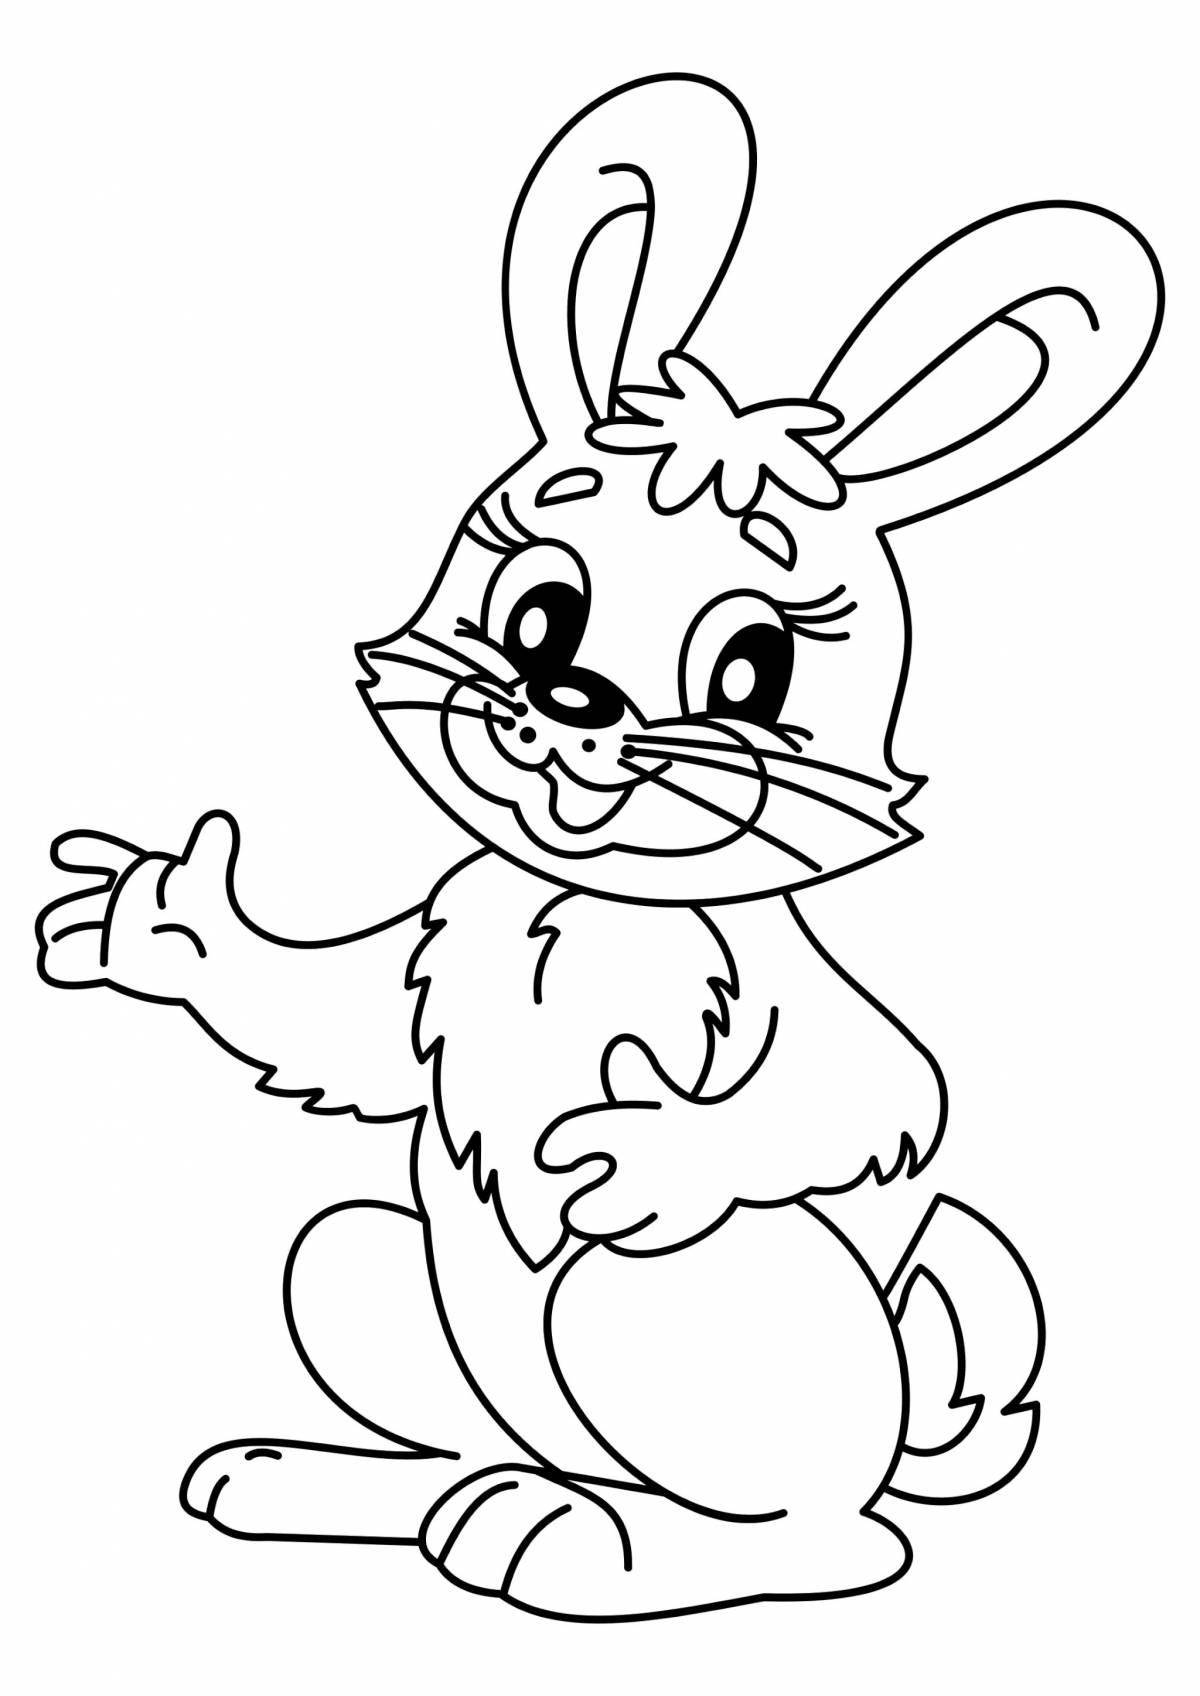 Gorgeous bunny coloring book for kids 6-7 years old